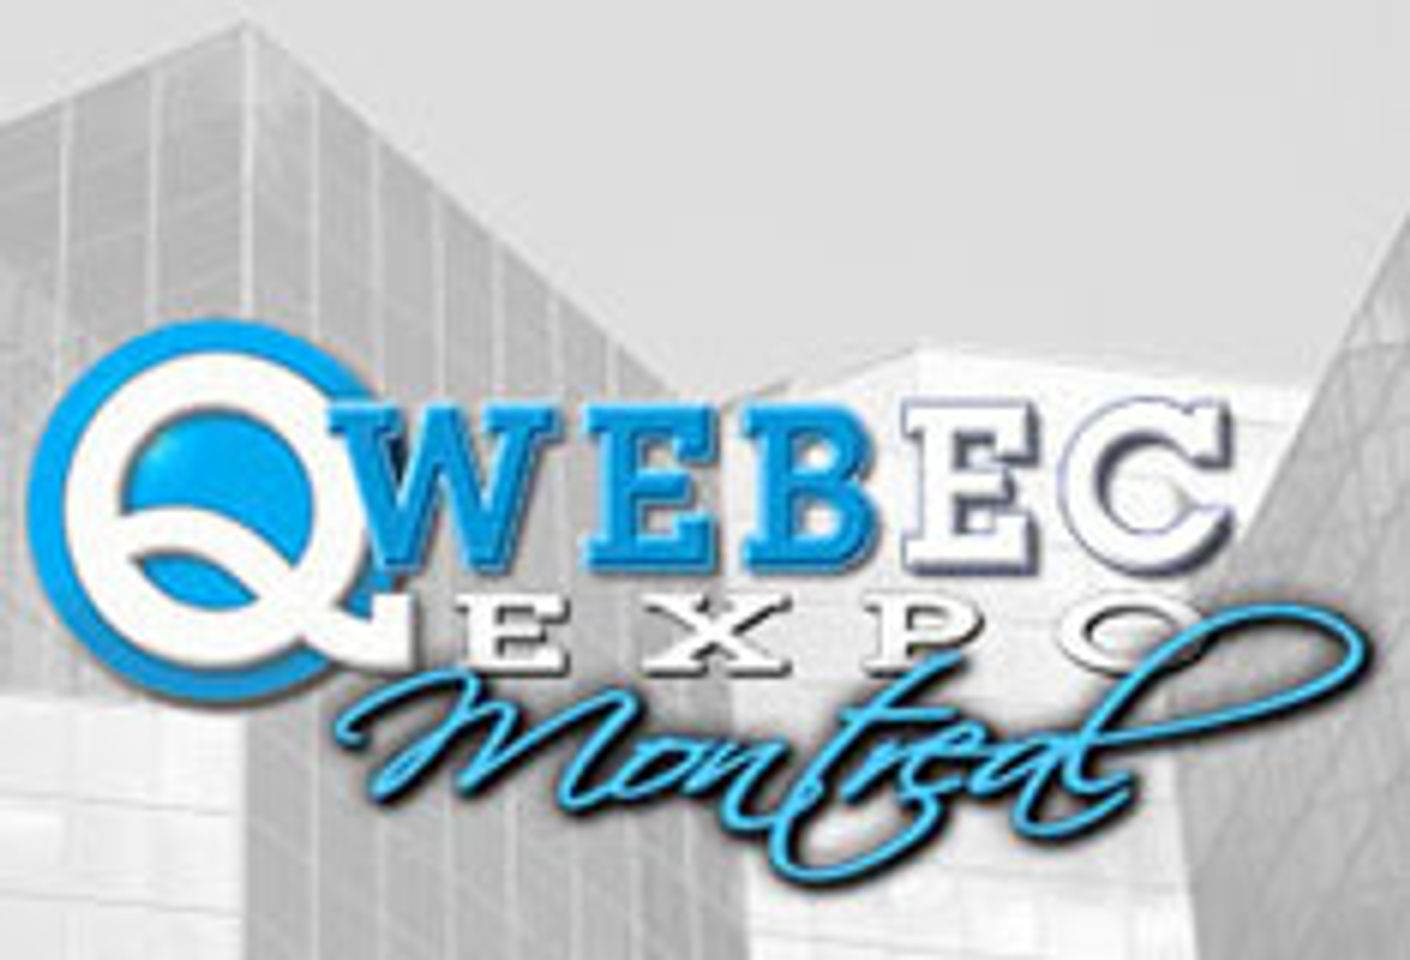 Qwebec Expo Early Bird Registration is Open